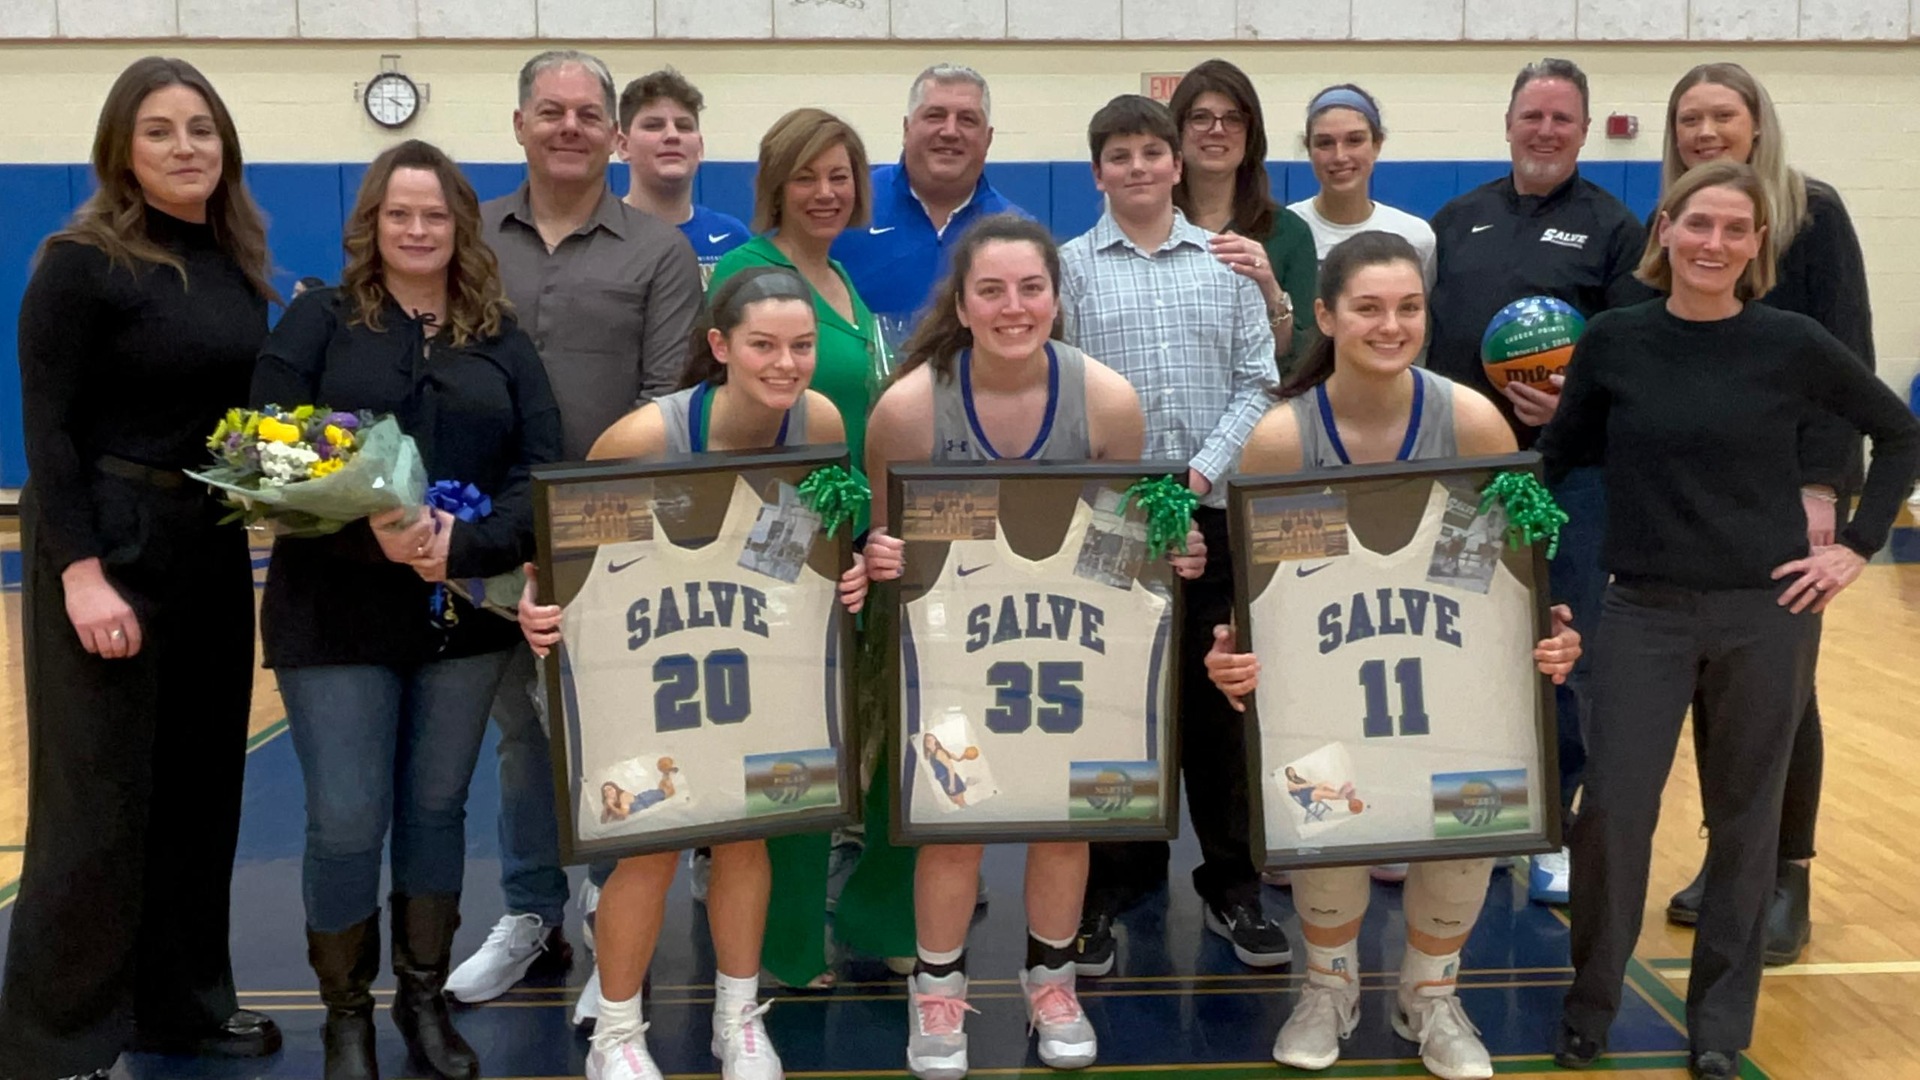 Seahawk seniors - Amanda Folan (#20), Olivia Martin (#35), Briana Neary (#11) - joined by their families and coaches before final regular season home game at the Rodgers Recreation Center. (Photo by Ed Habershaw '03M)